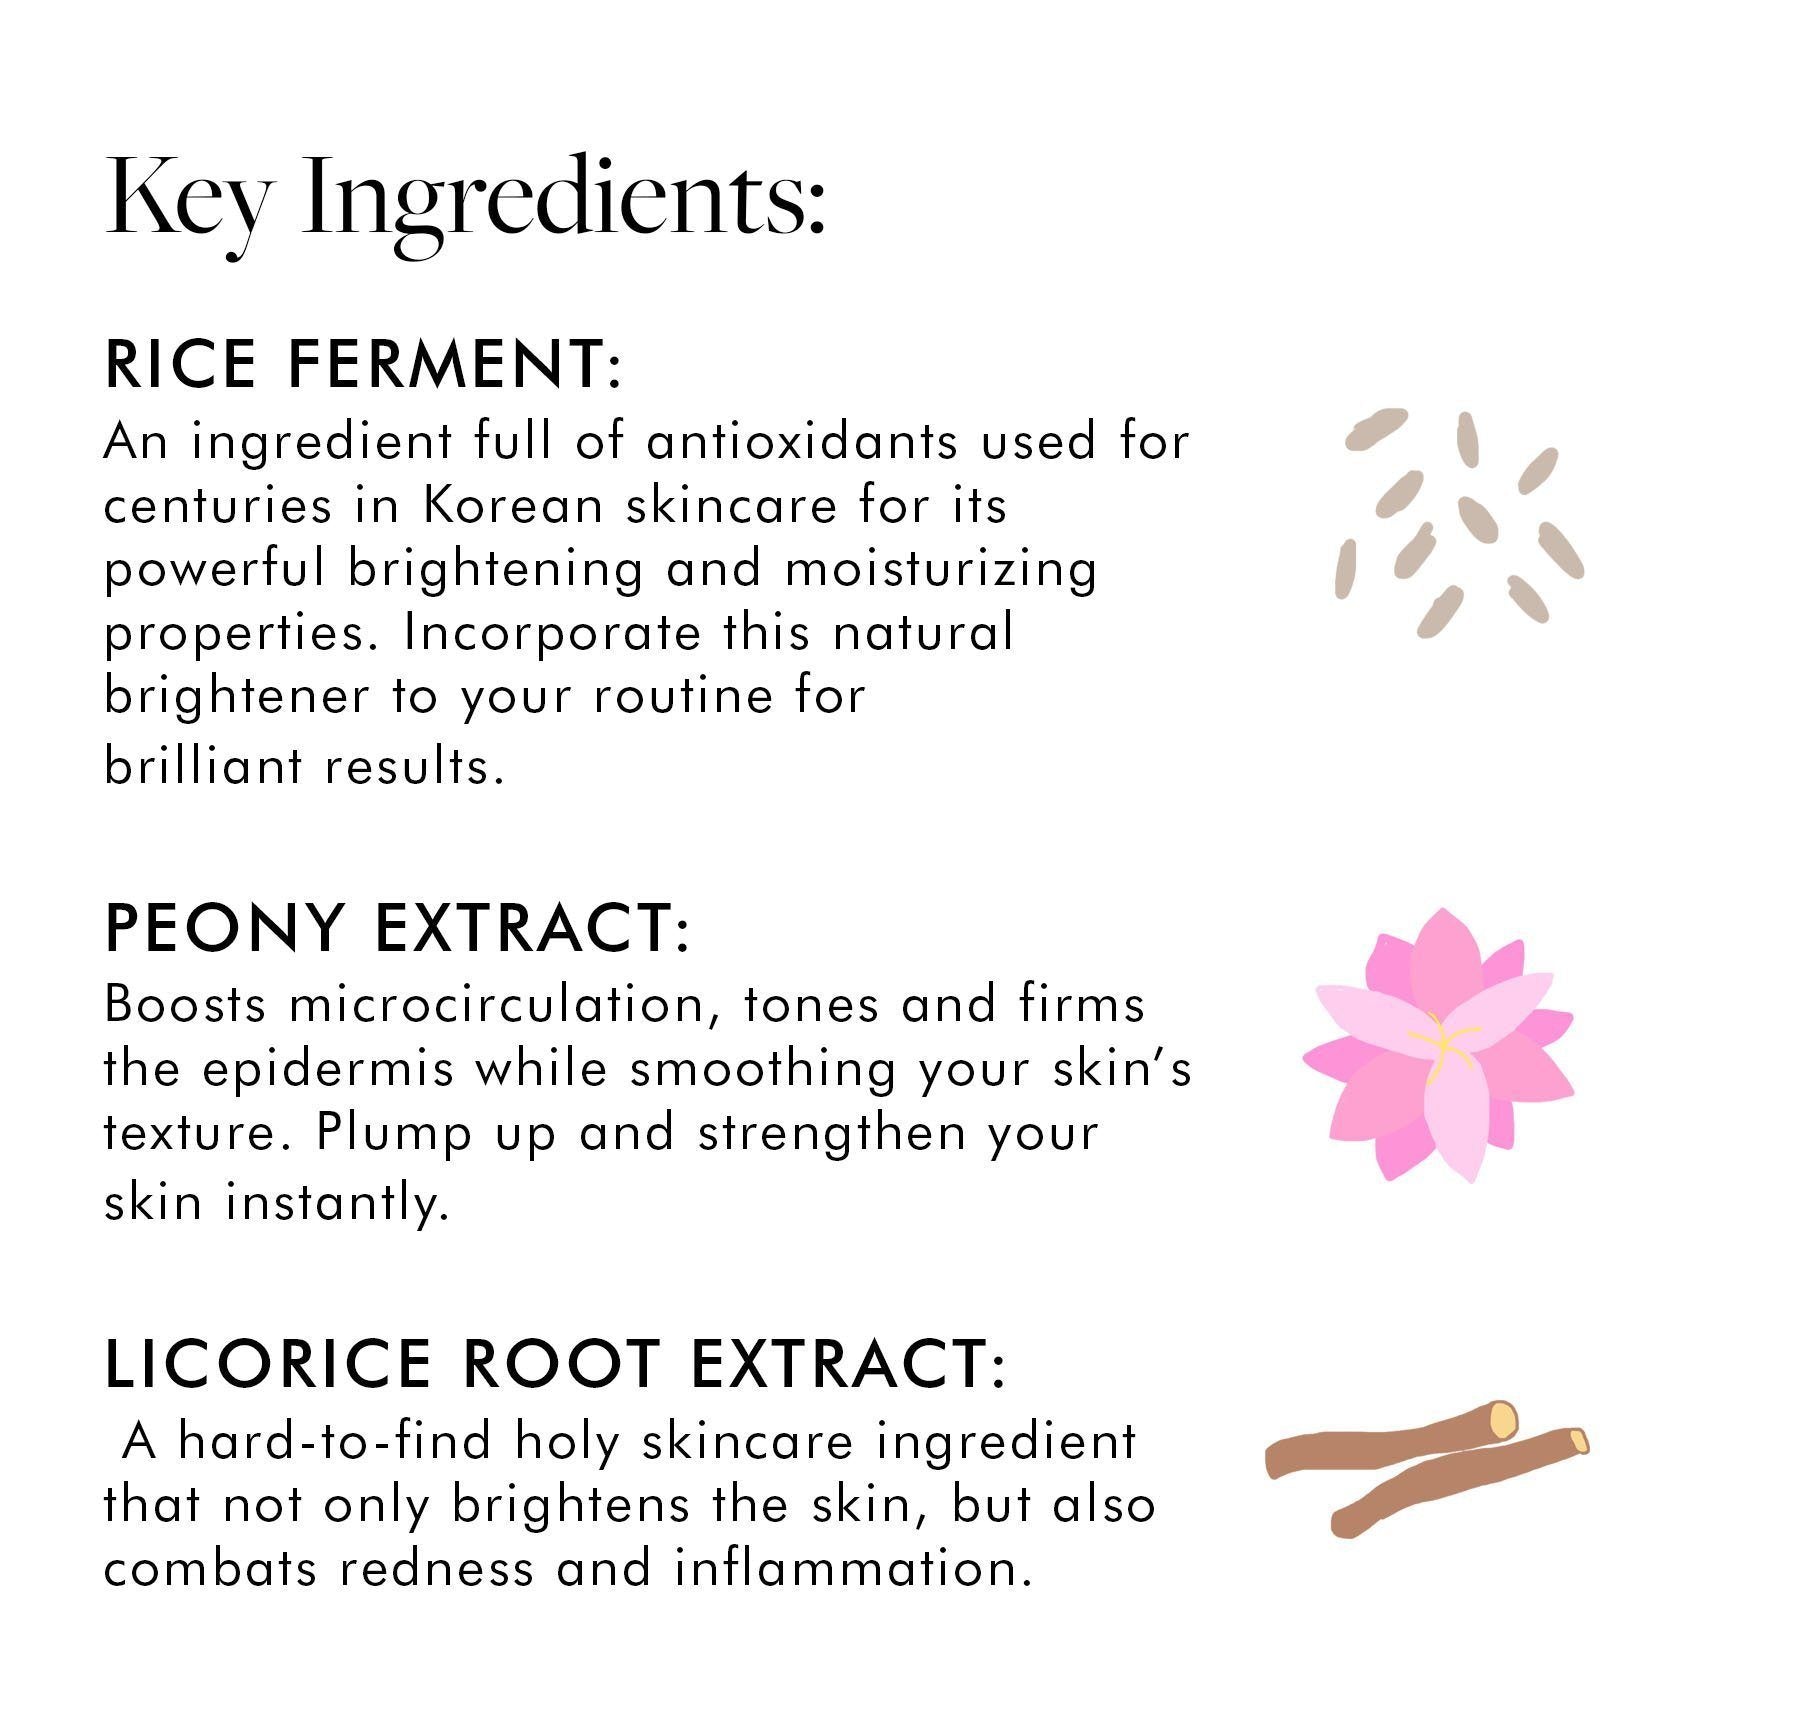 key ingredients: rice ferment, peony extract and licorice root extract